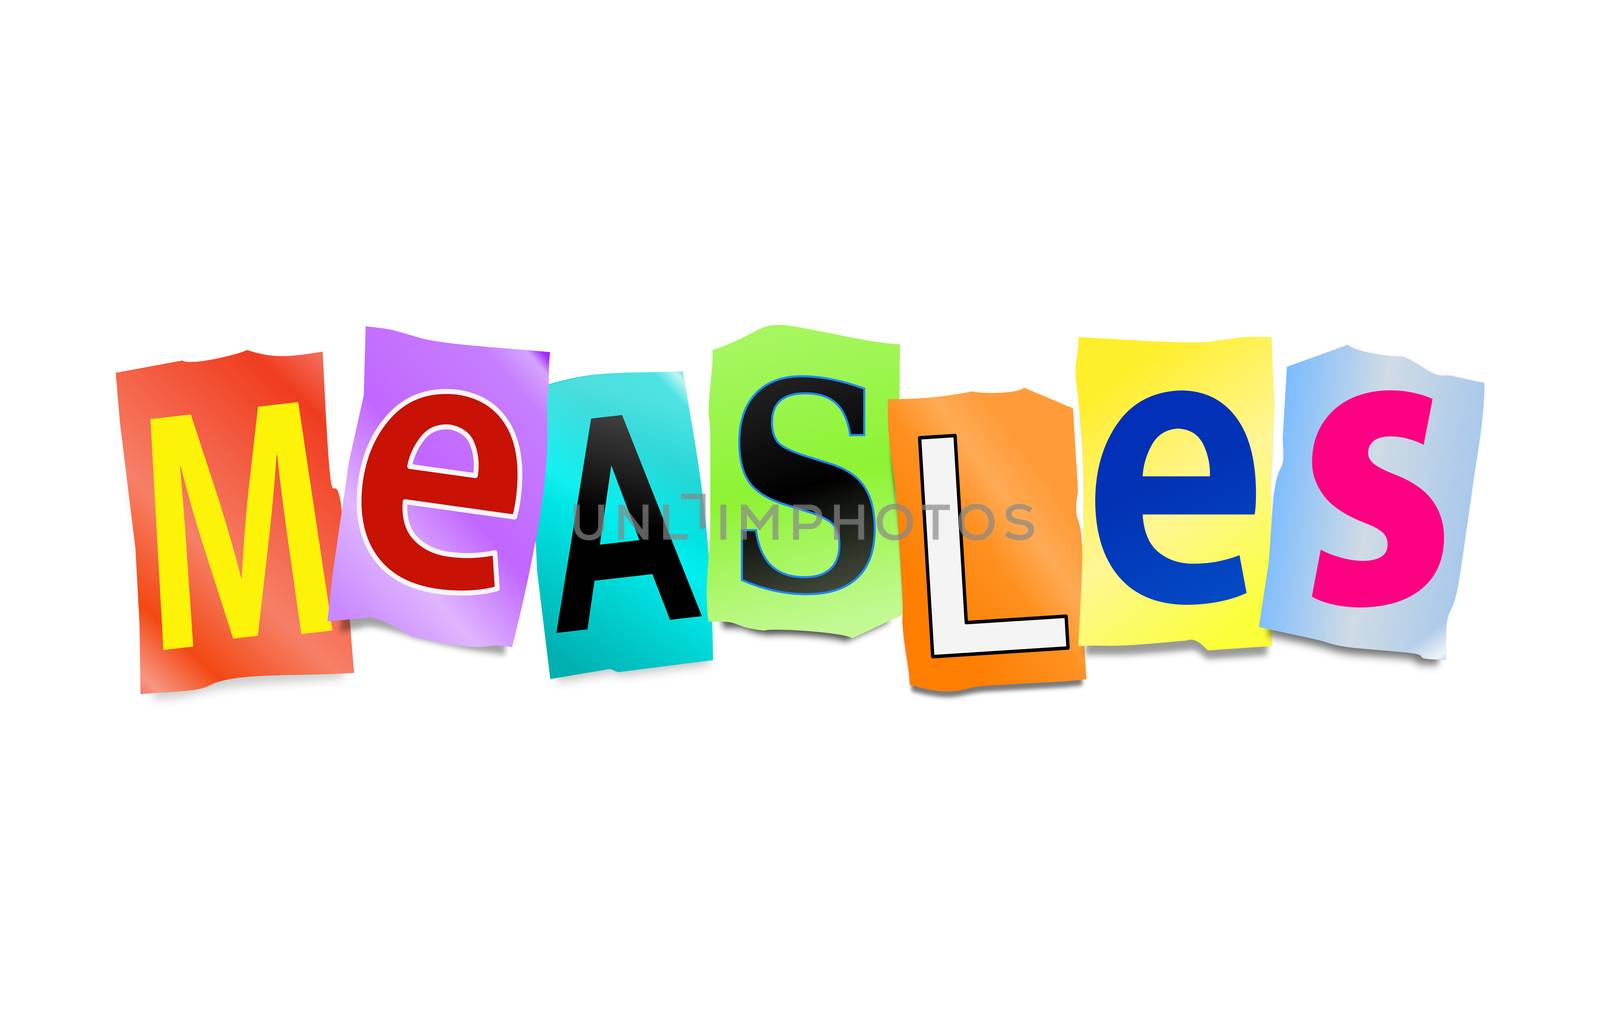 Illustration depicting a set of cut out printed letters arranged to form the word measles.